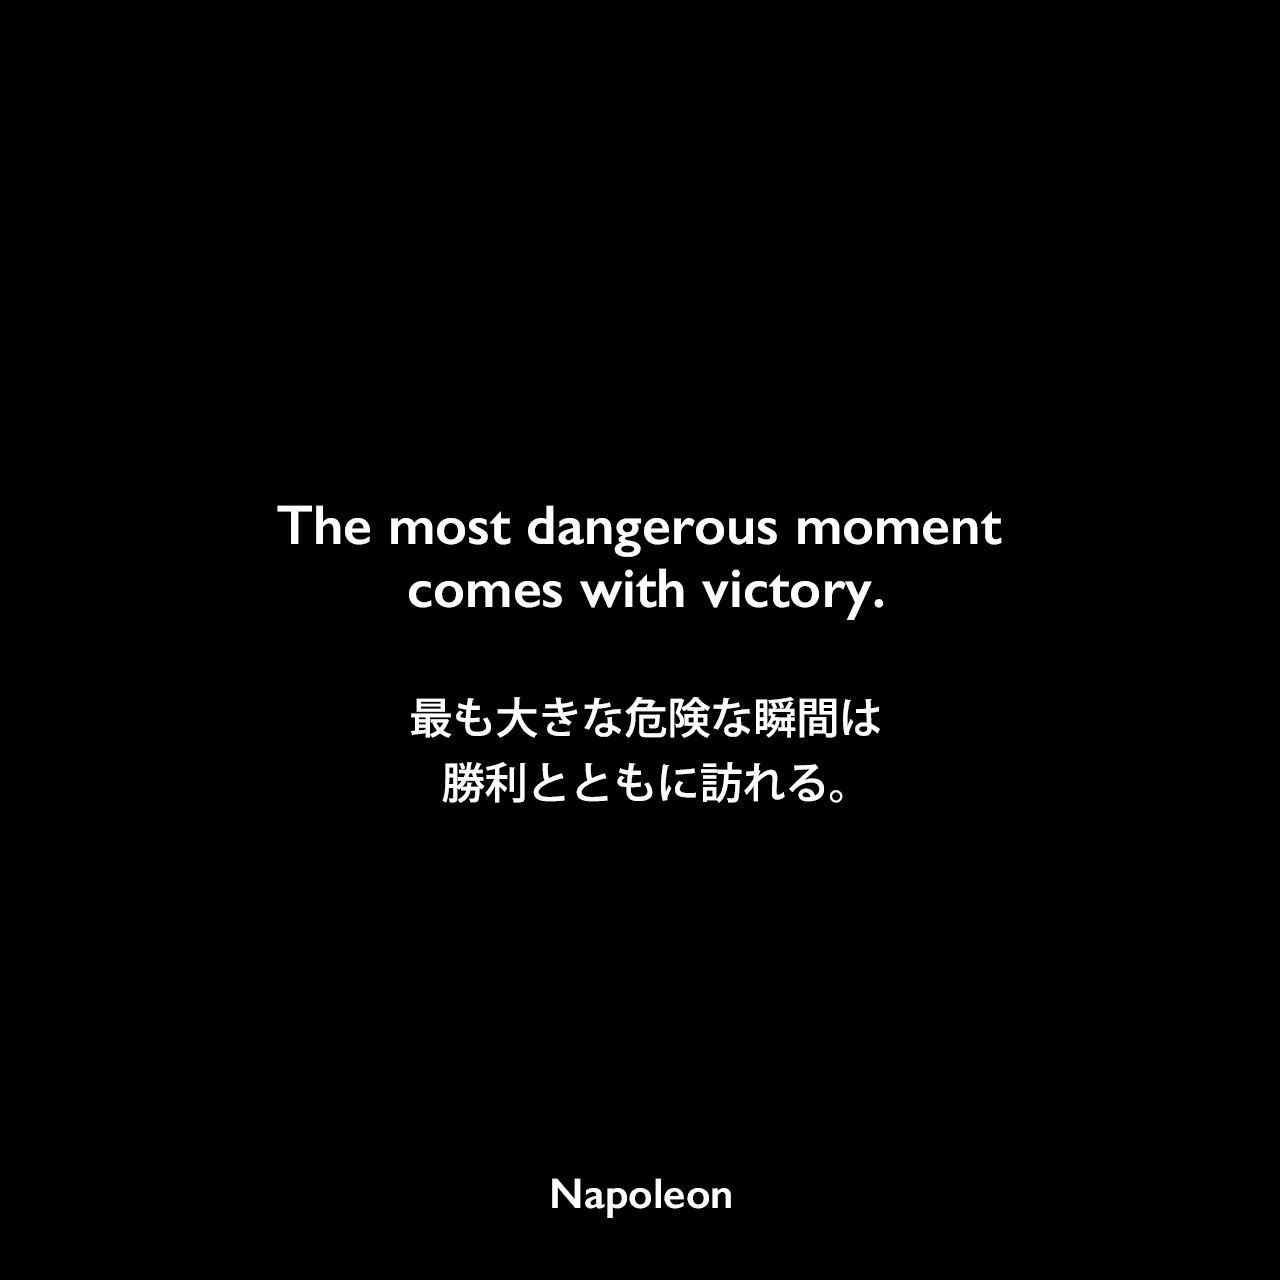 The most dangerous moment comes with victory.最も大きな危険な瞬間は、勝利とともに訪れる。Napoleon